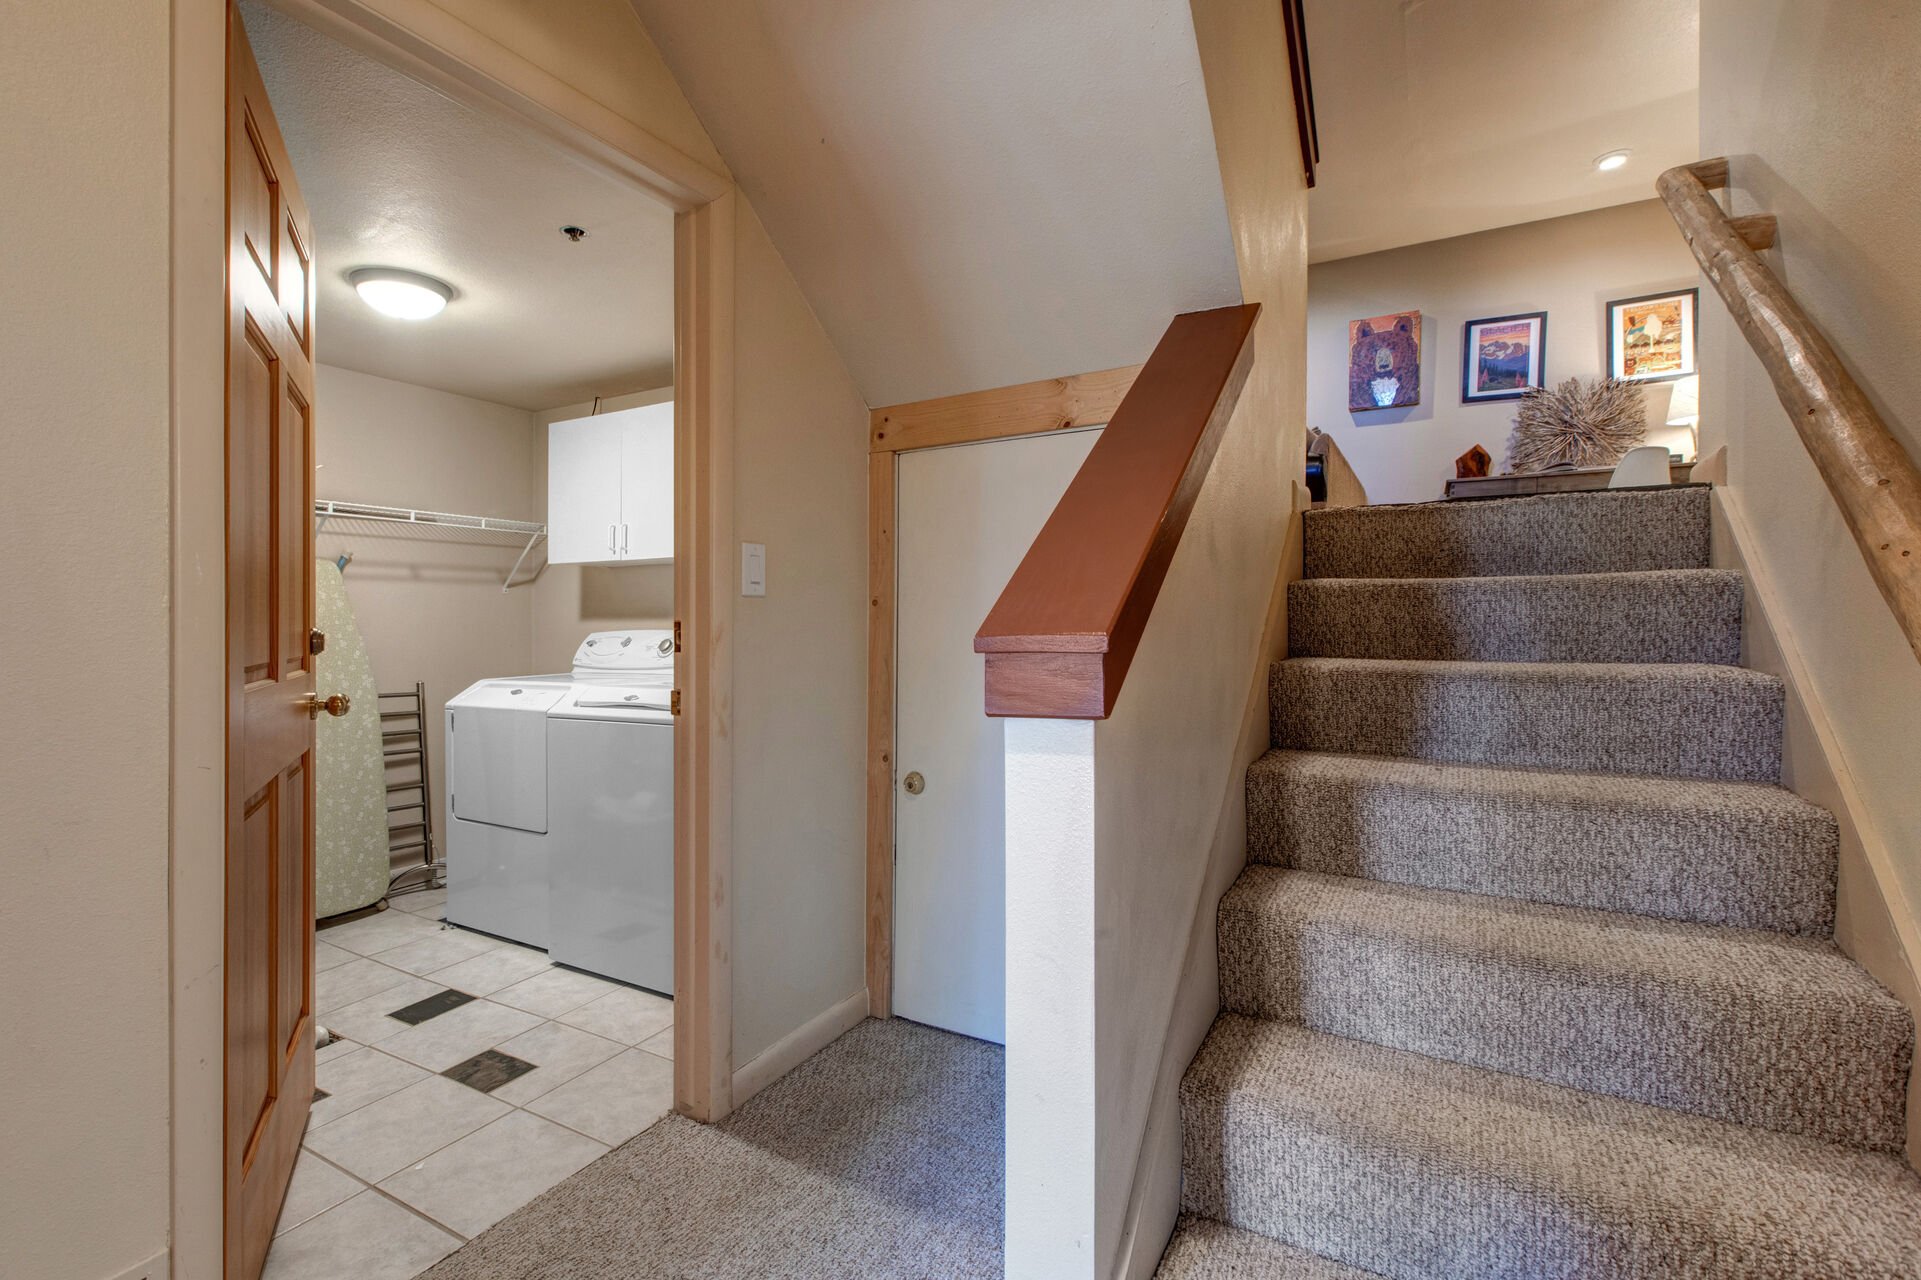 Lowest Level with full-sized laundry room and Bedrooms 2 & 3